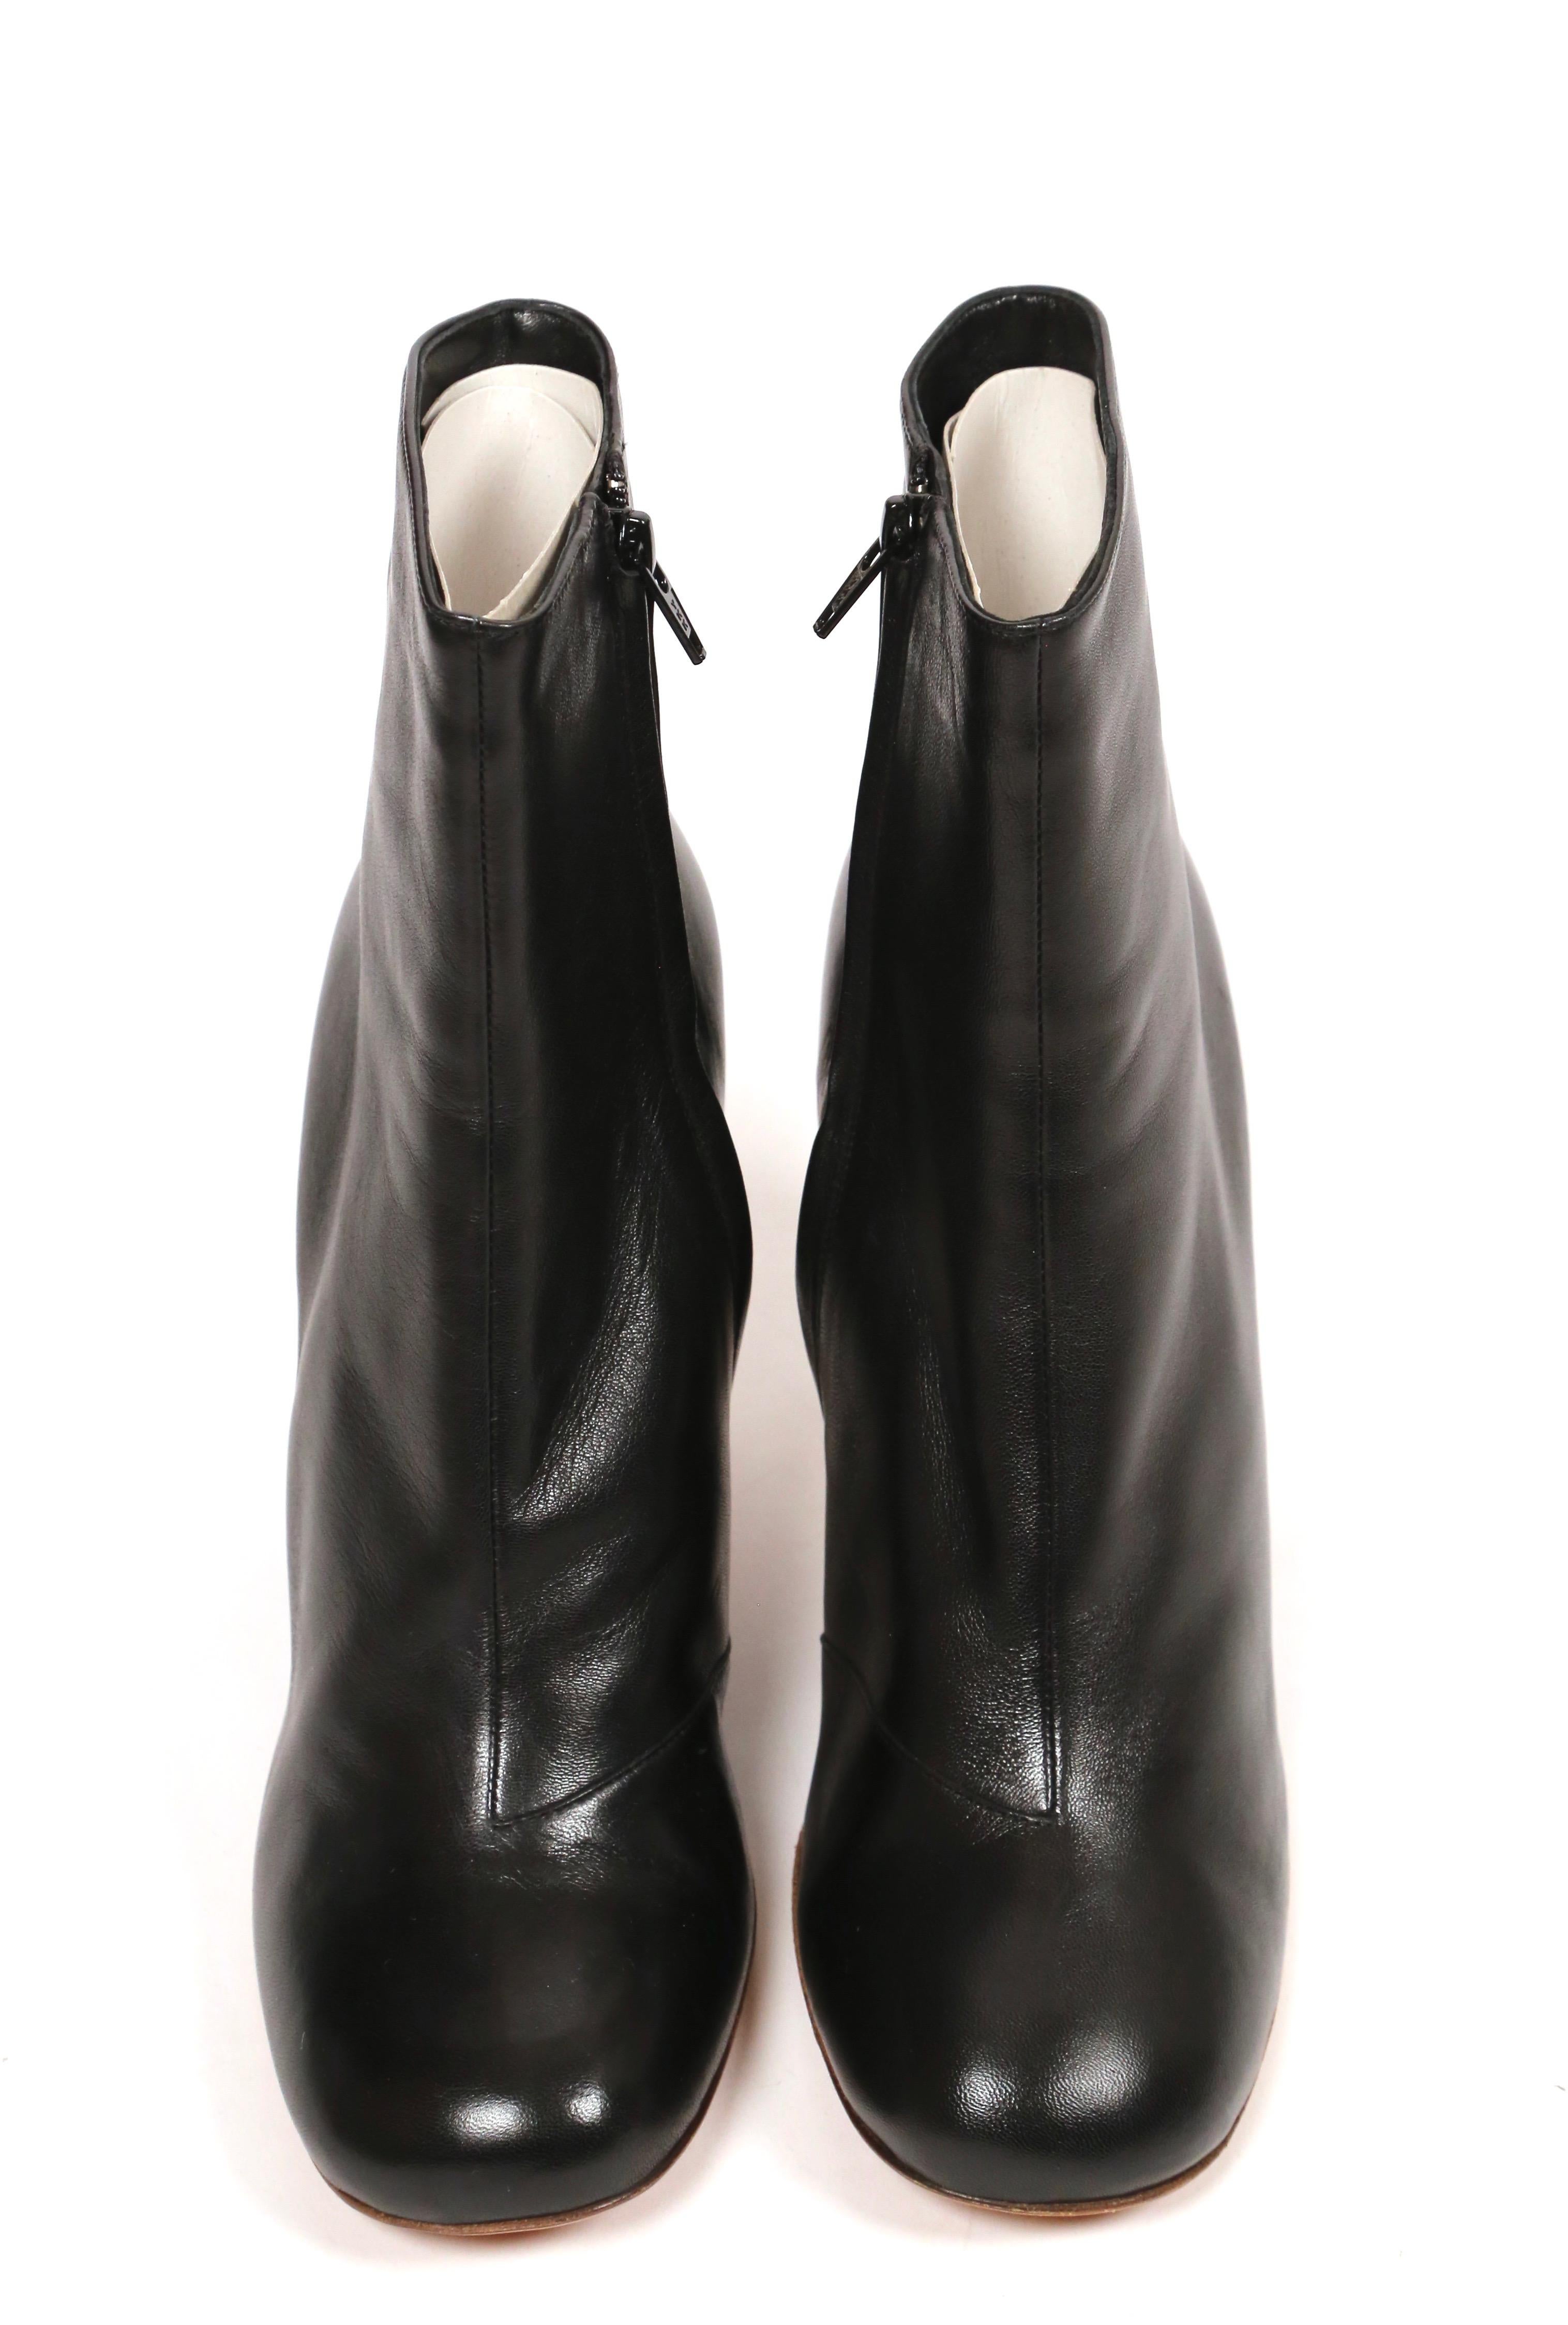 CELINE by PHOEBE PHILO black leather ankle boots with silver heels ...